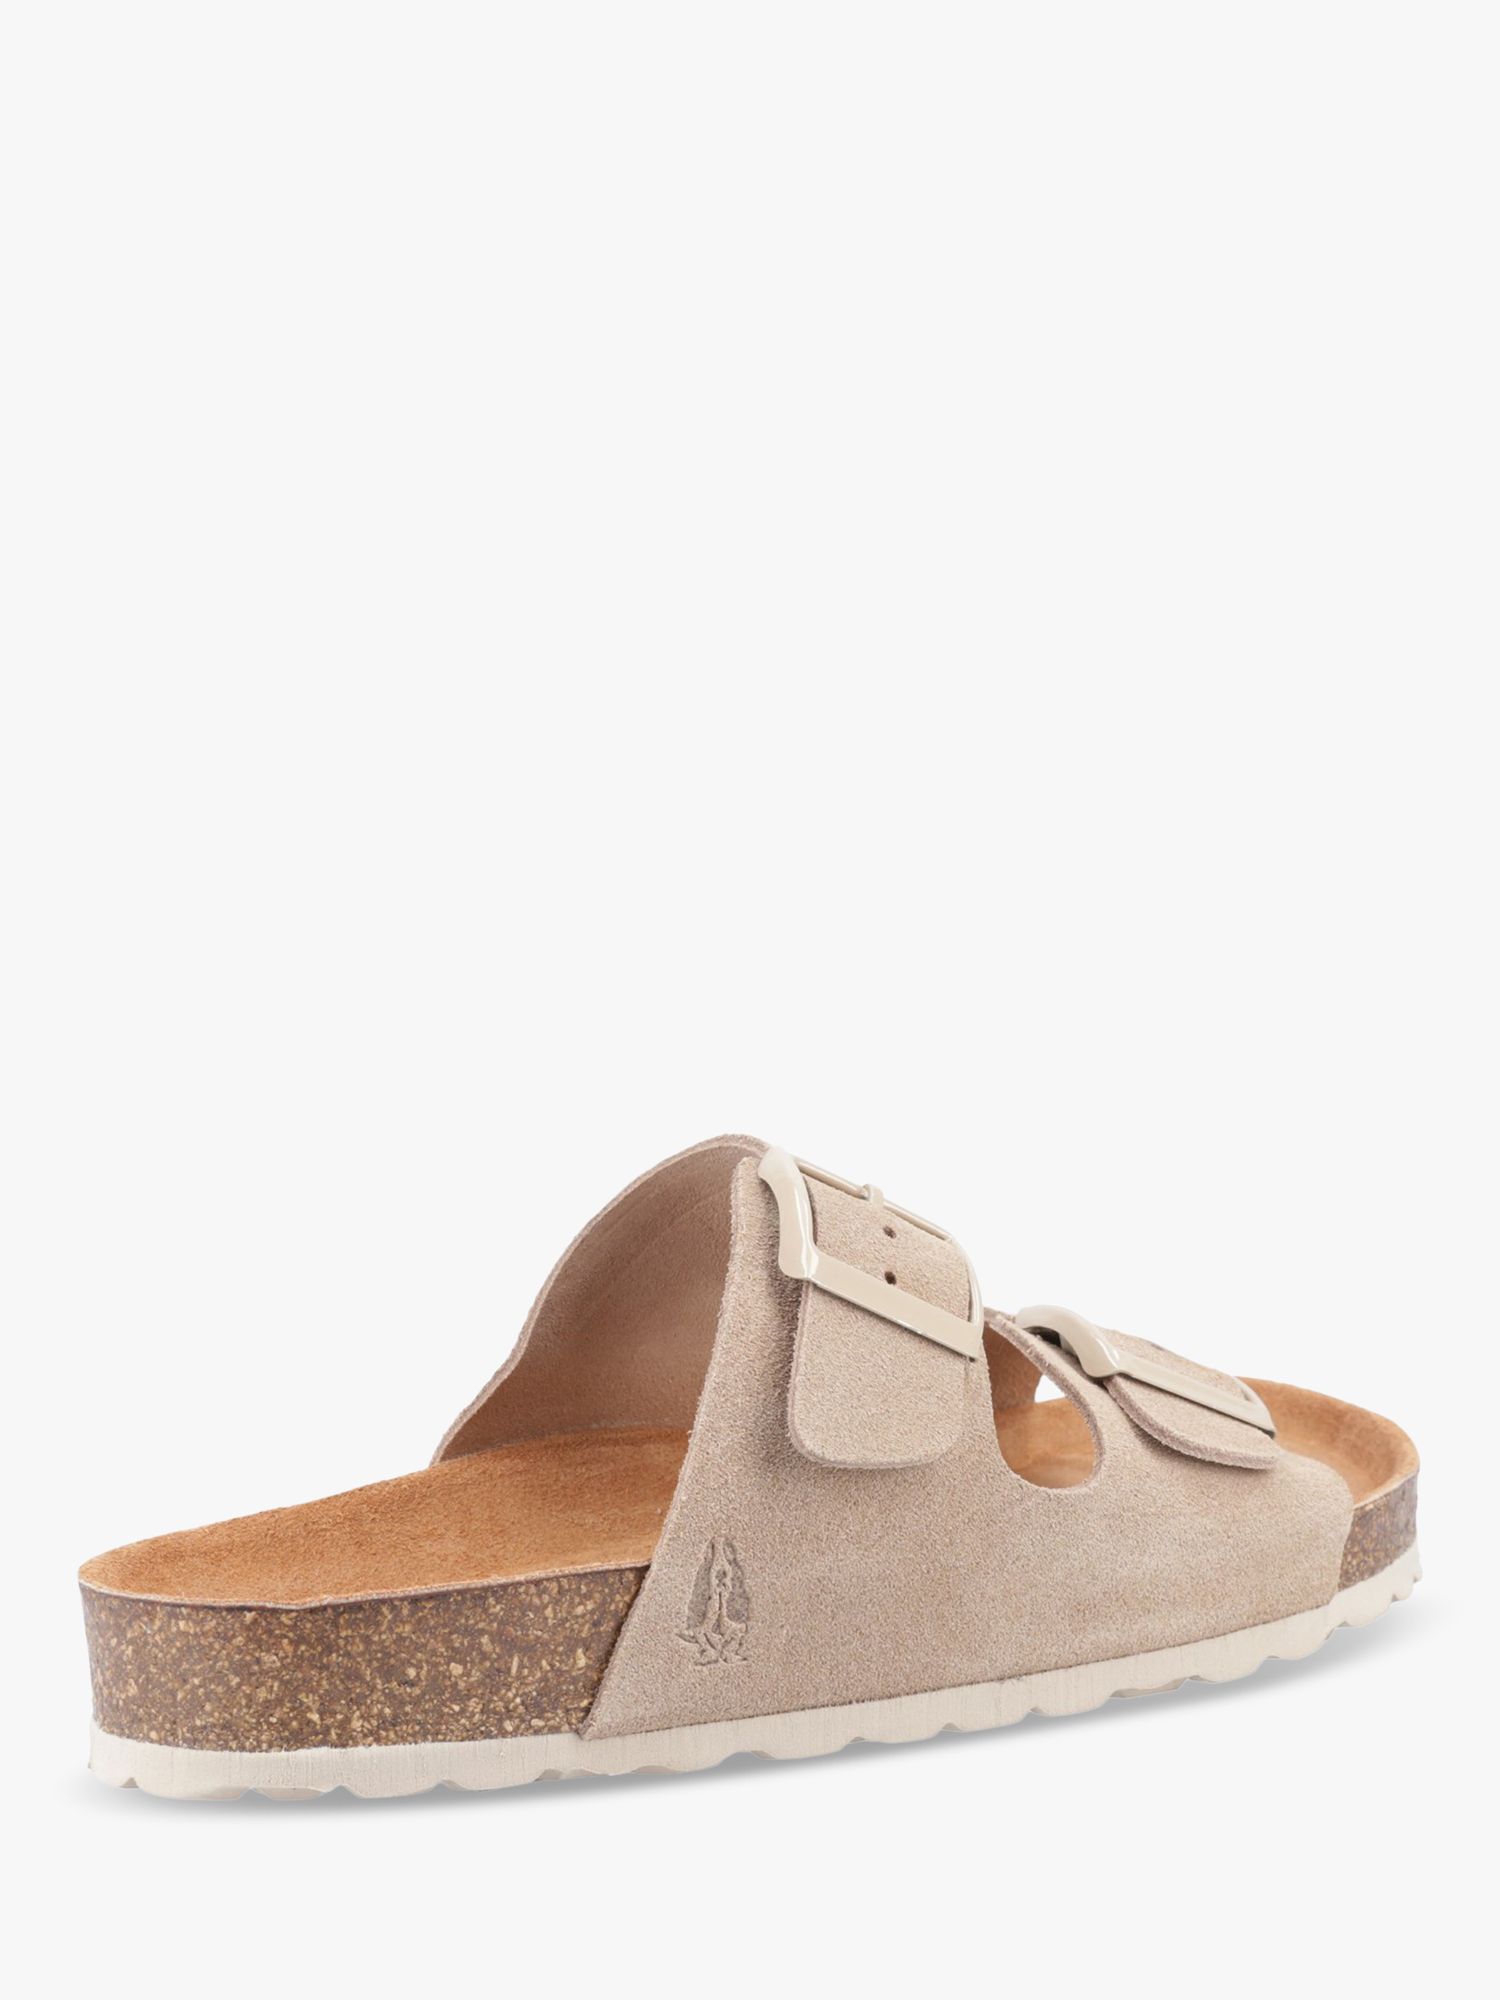 Buy Hush Puppies Blaire Suede Footbed Sandals Online at johnlewis.com